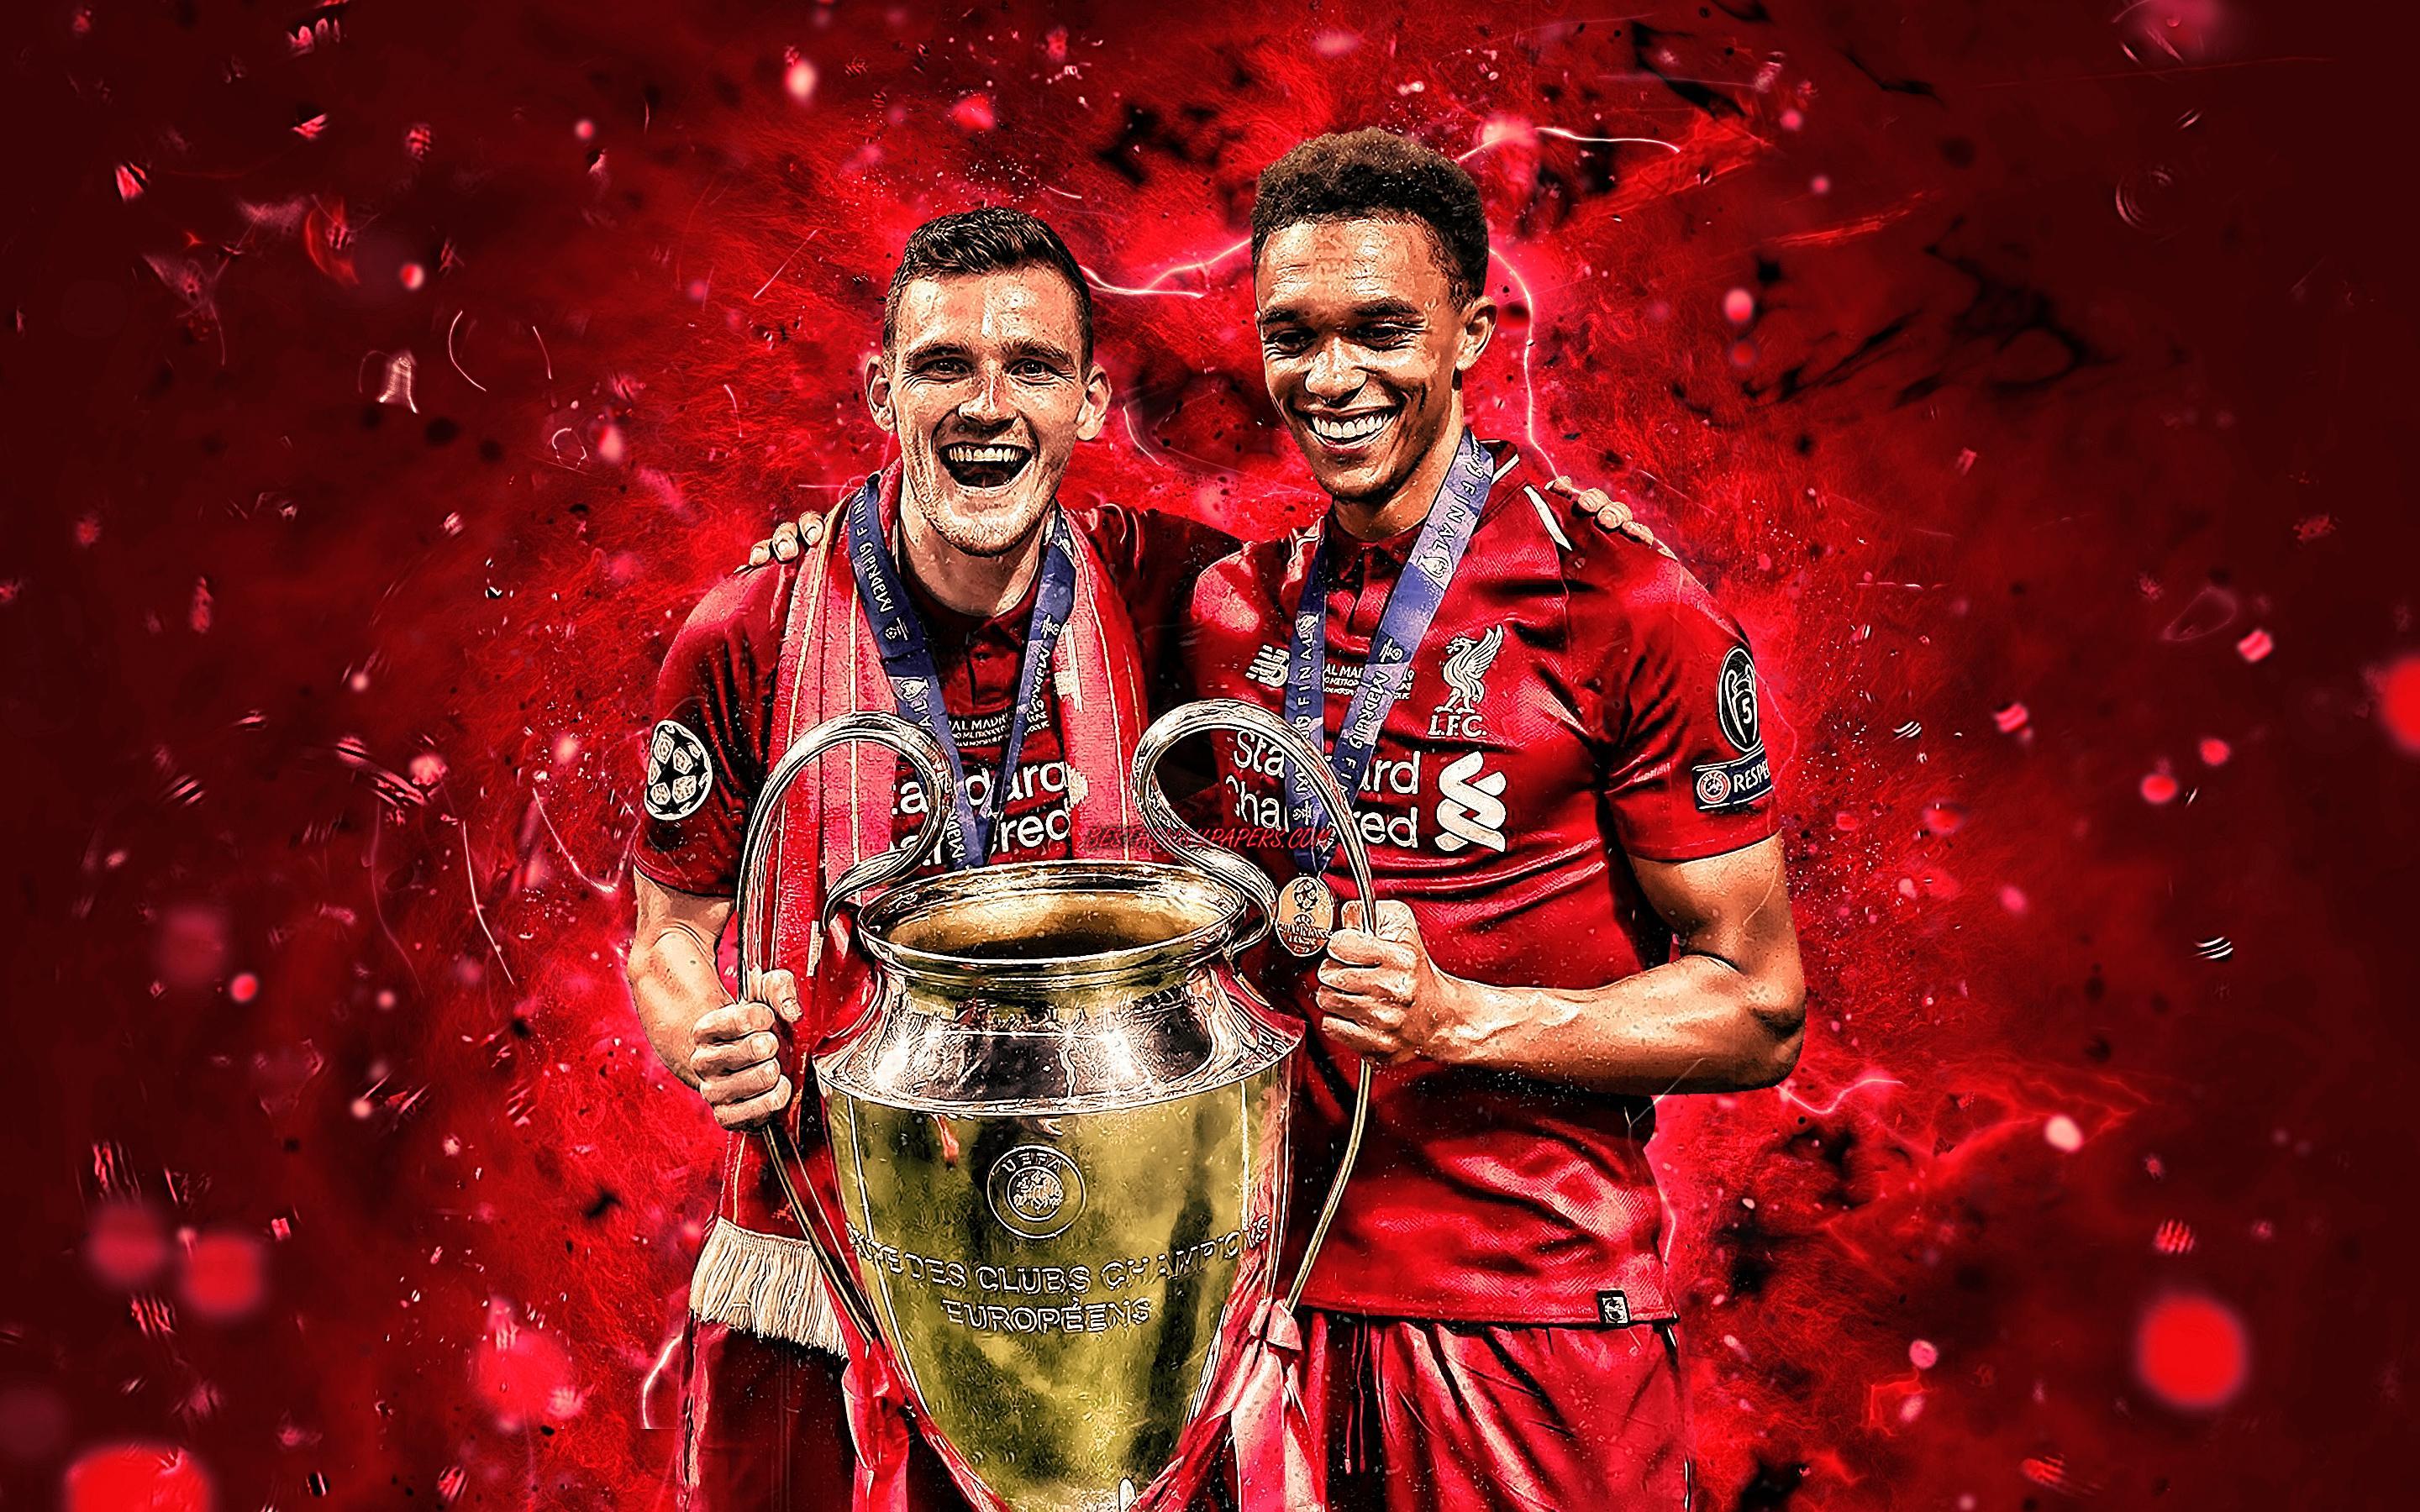 Download Wallpaper Andrew Robertson, Trent Alexander Arnold, UEFA Champions League, Liverpool FC, Soccer, Abstract Art, England, Football, Neon Lights, LFC For Desktop With Resolution 2880x1800. High Quality HD Picture Wallpaper